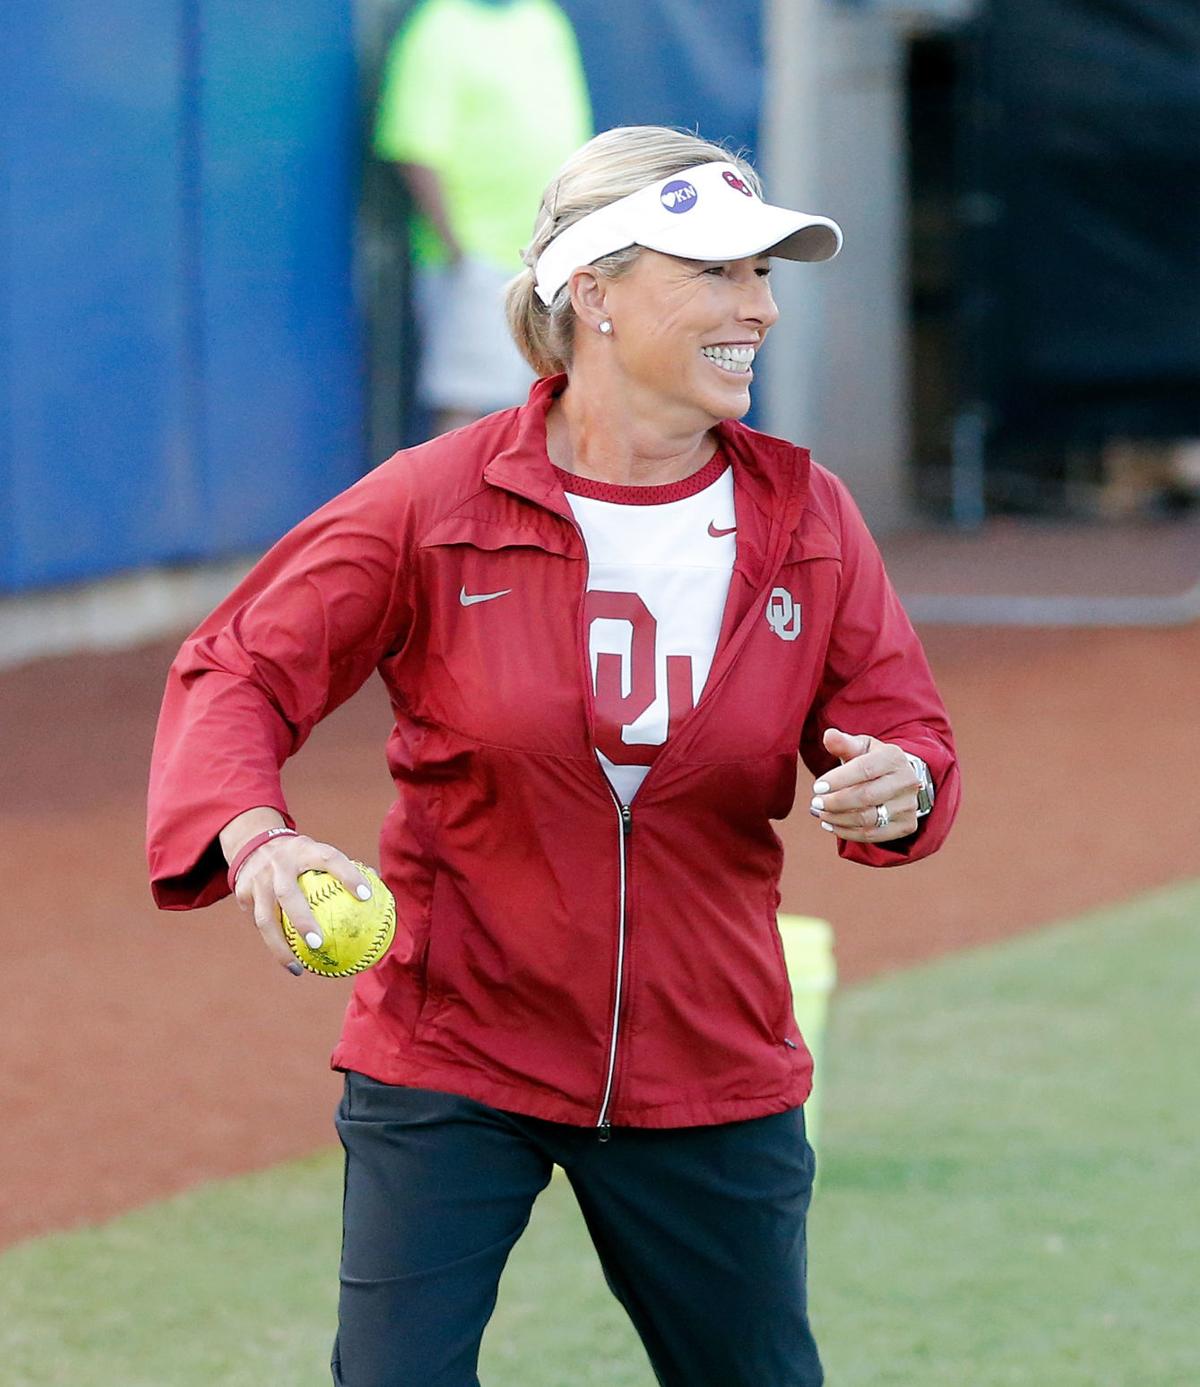 OU softball: A new $22 million softball stadium appears in the works at Oklahoma | OU ...